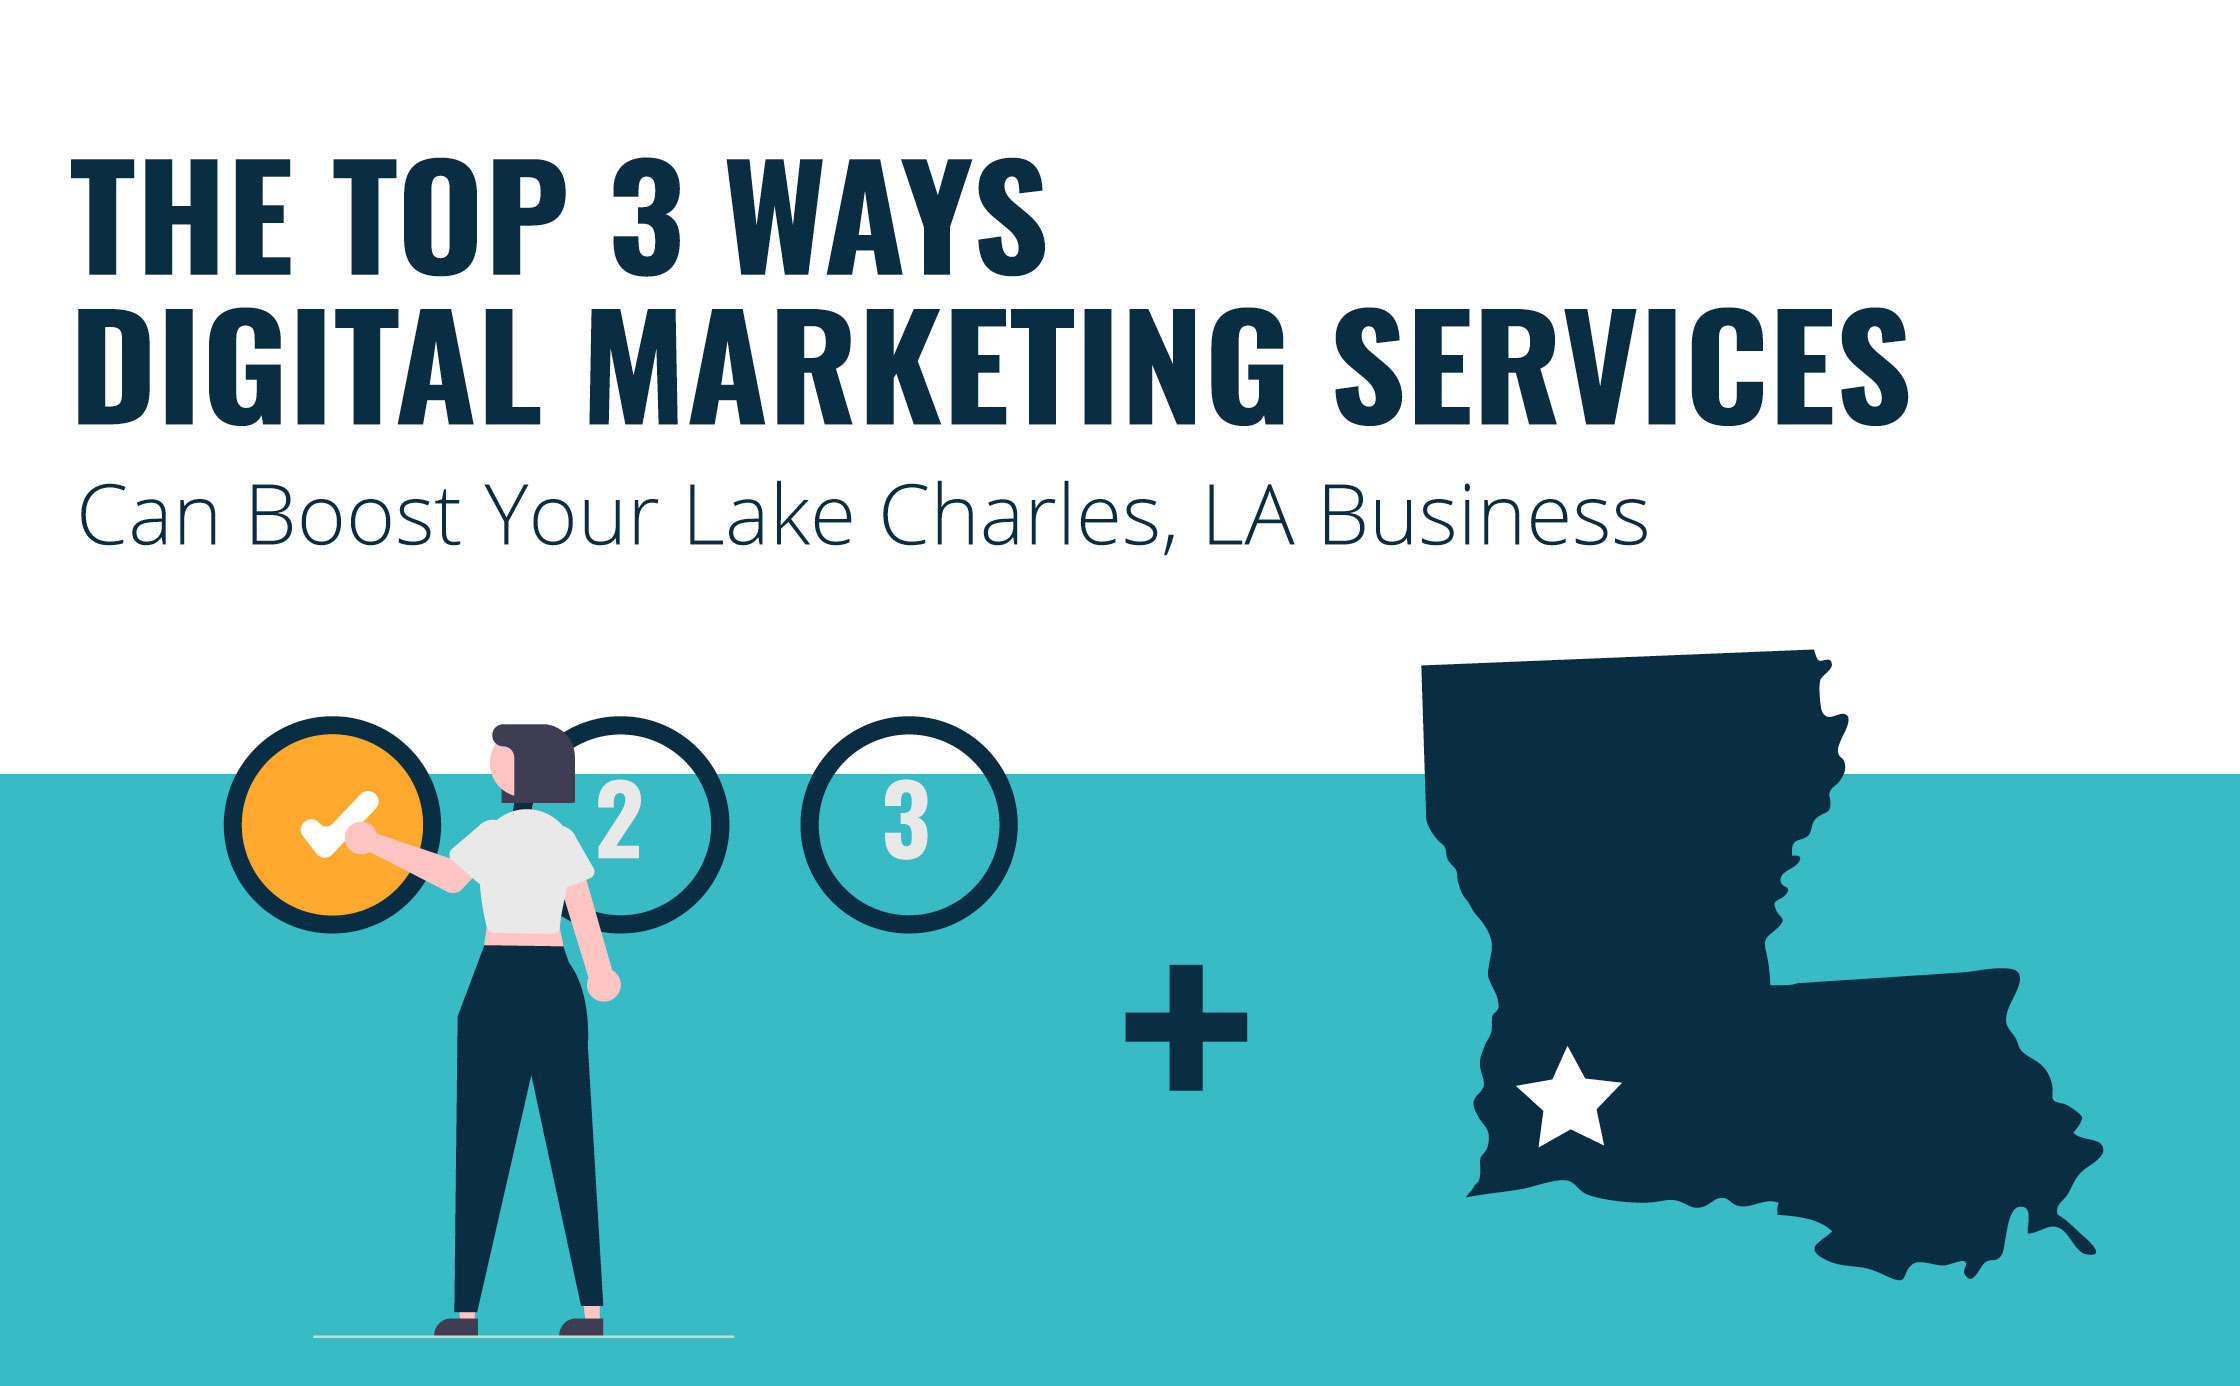 Top 3 Ways Digital Marketing Services Can Boost Your Lake Charles, LA Business